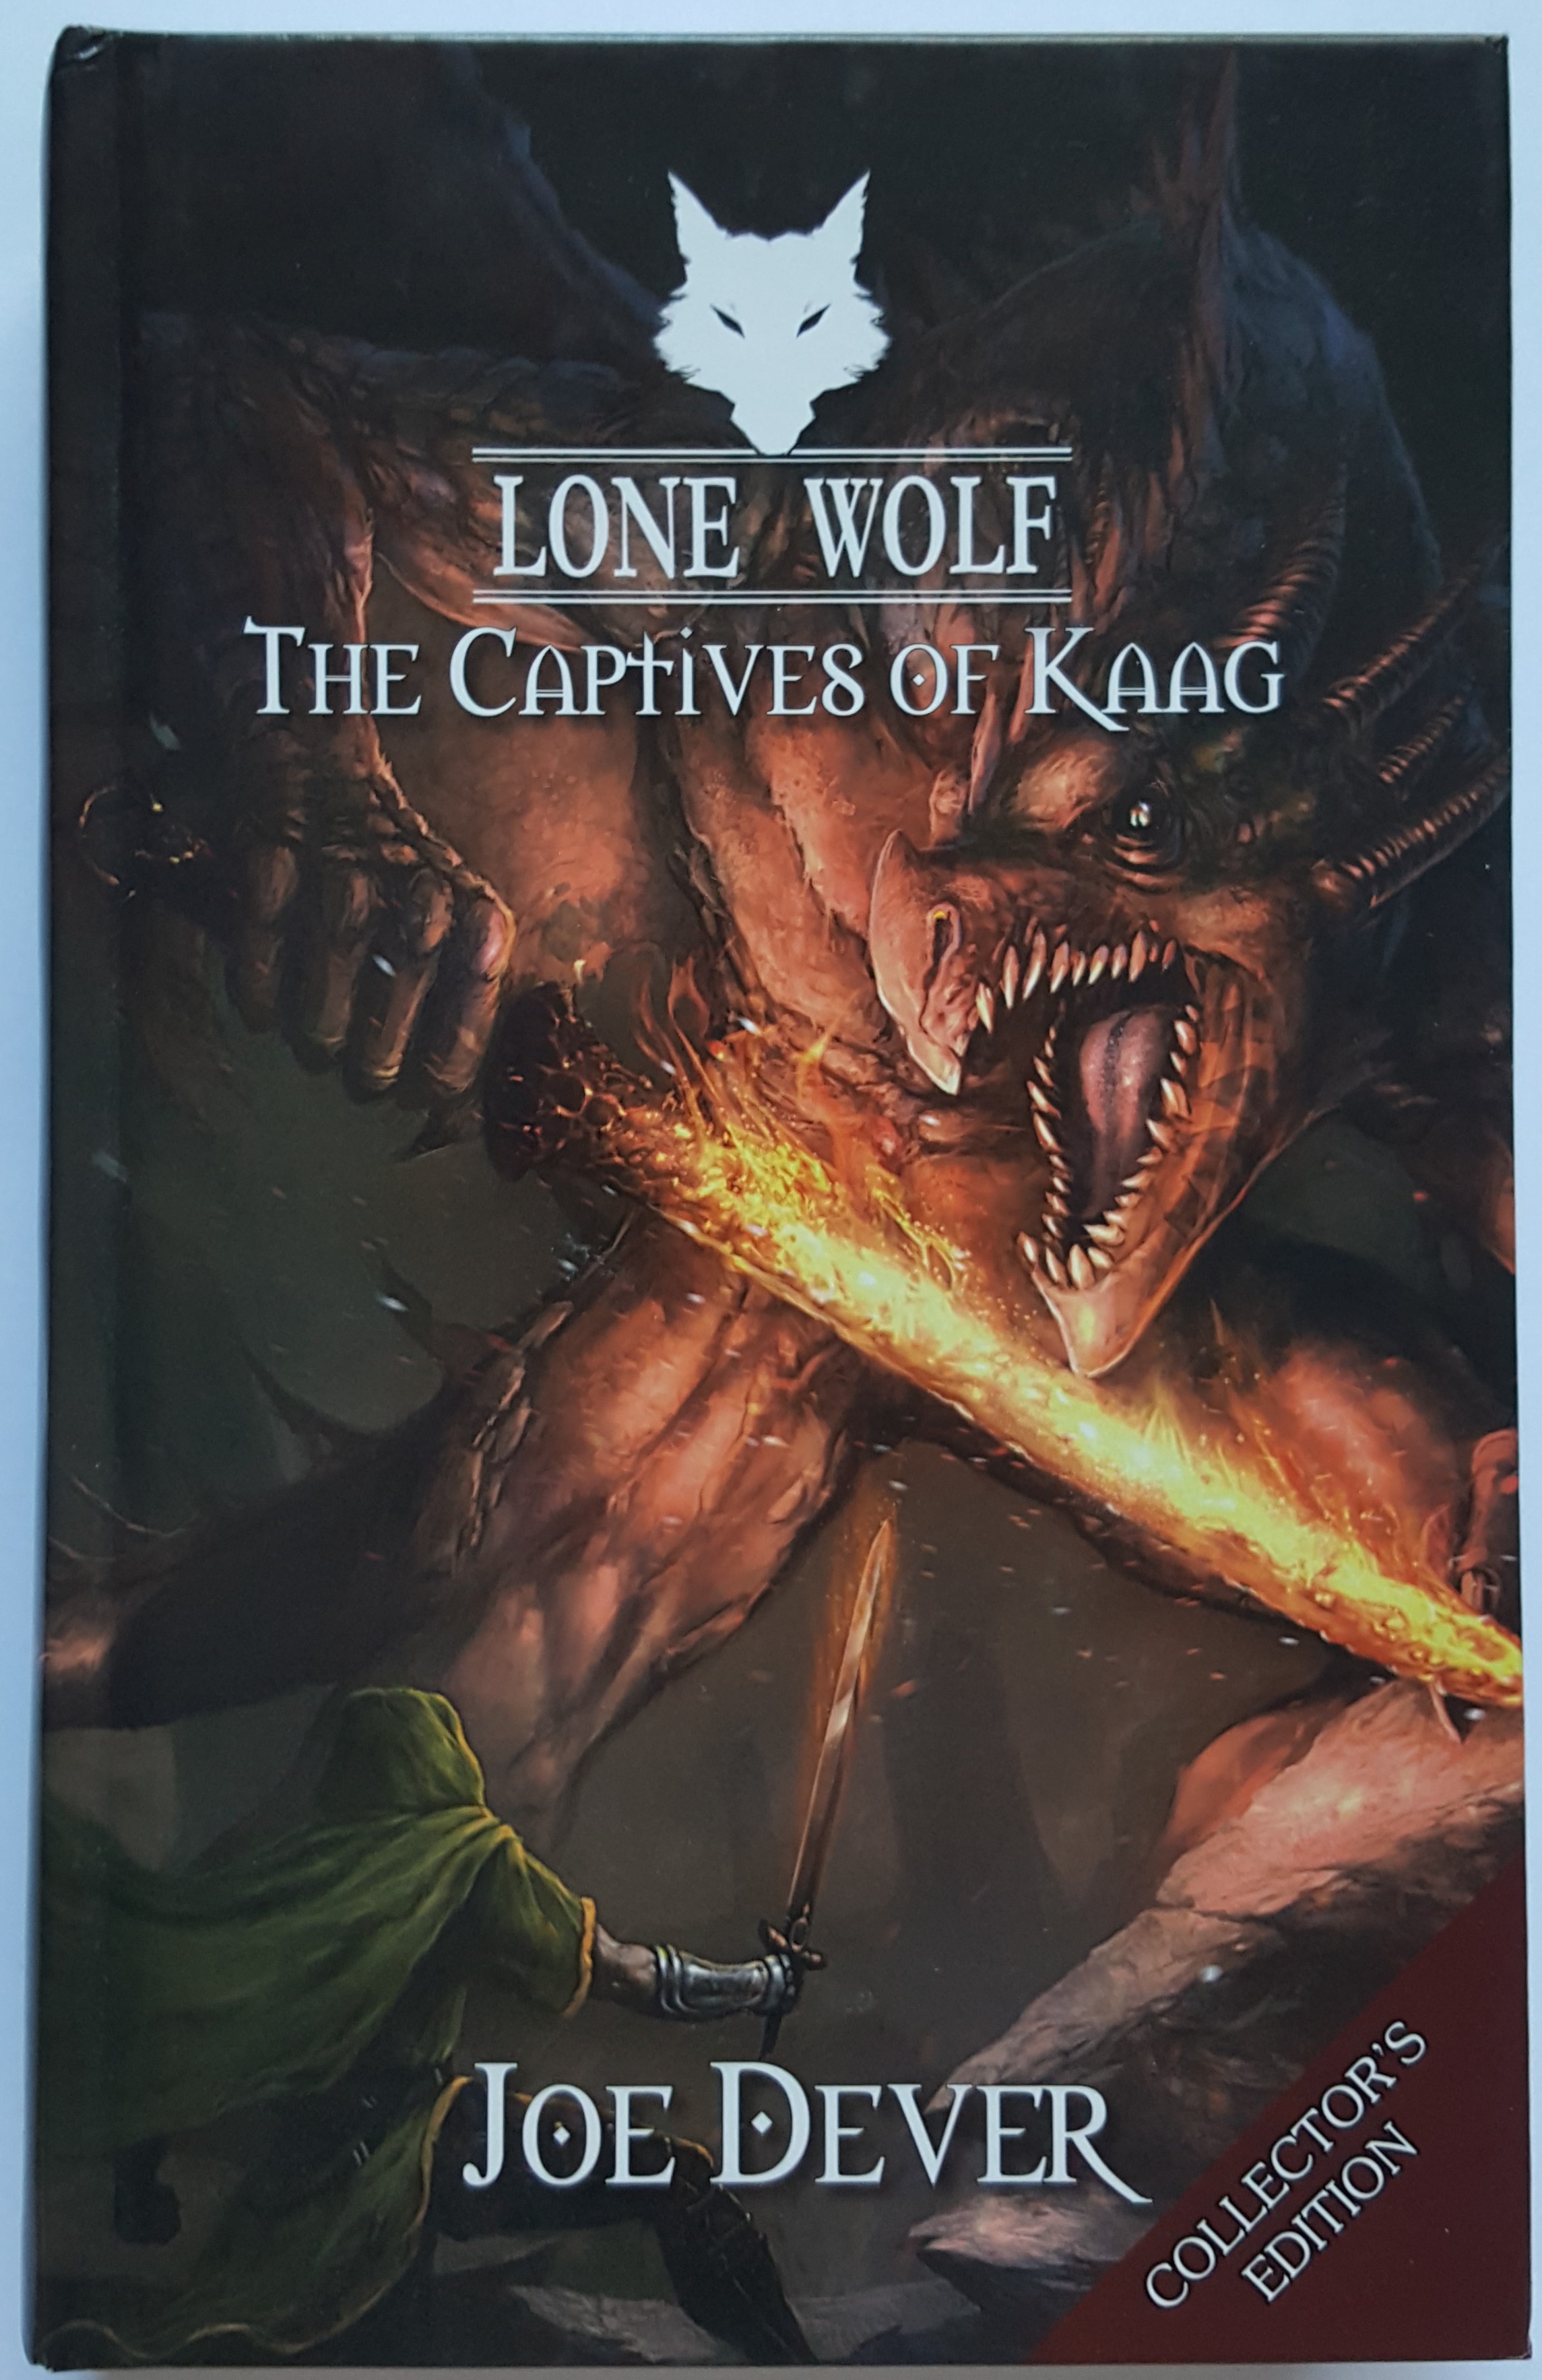 Item - The Captives of Kaag (collector's edition) - Demian's